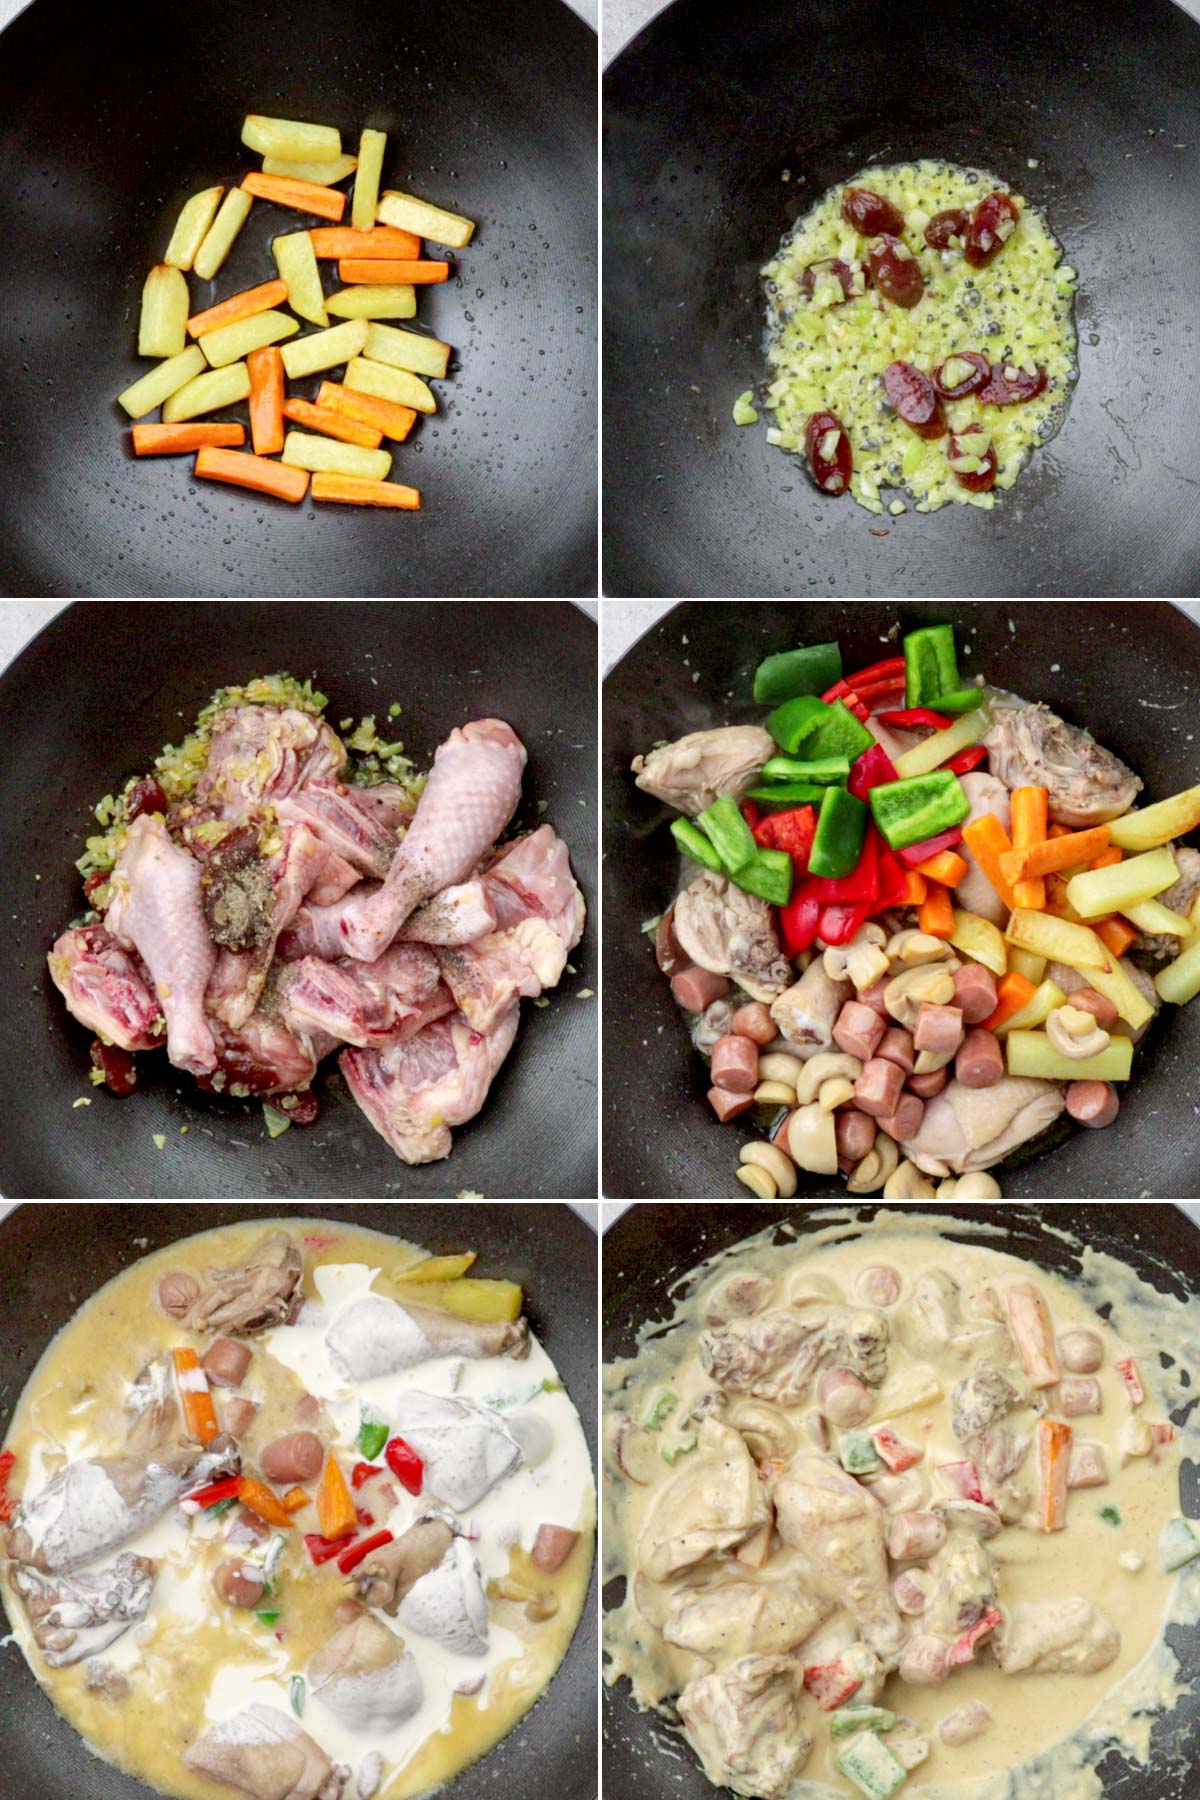 Steps on how to cook chicken pastel recipe.